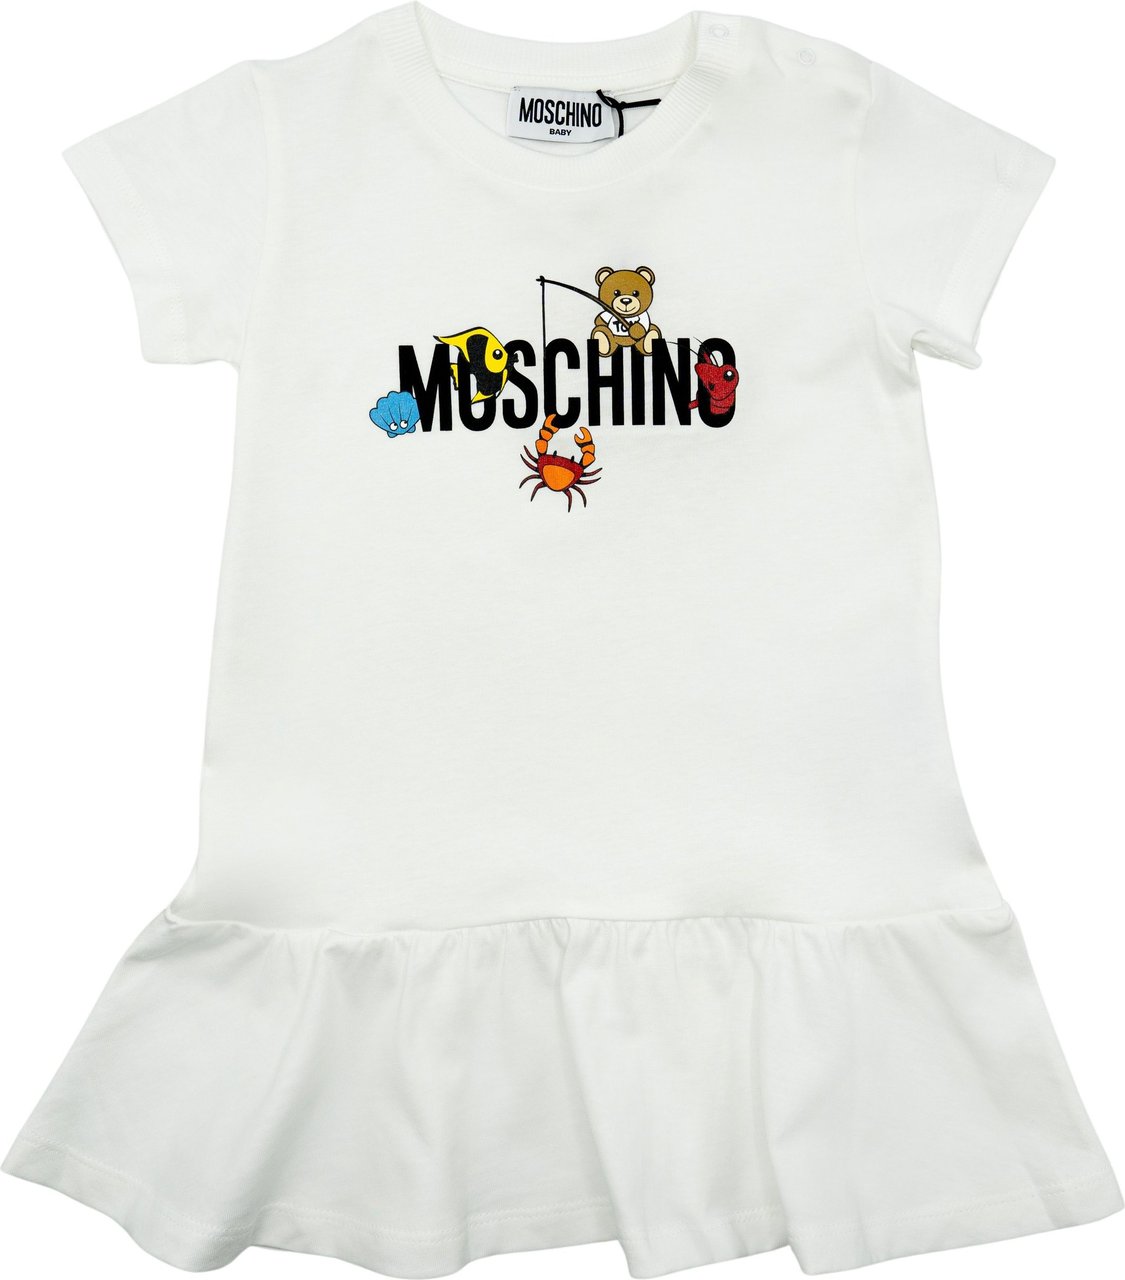 Moschino dress divers Divers